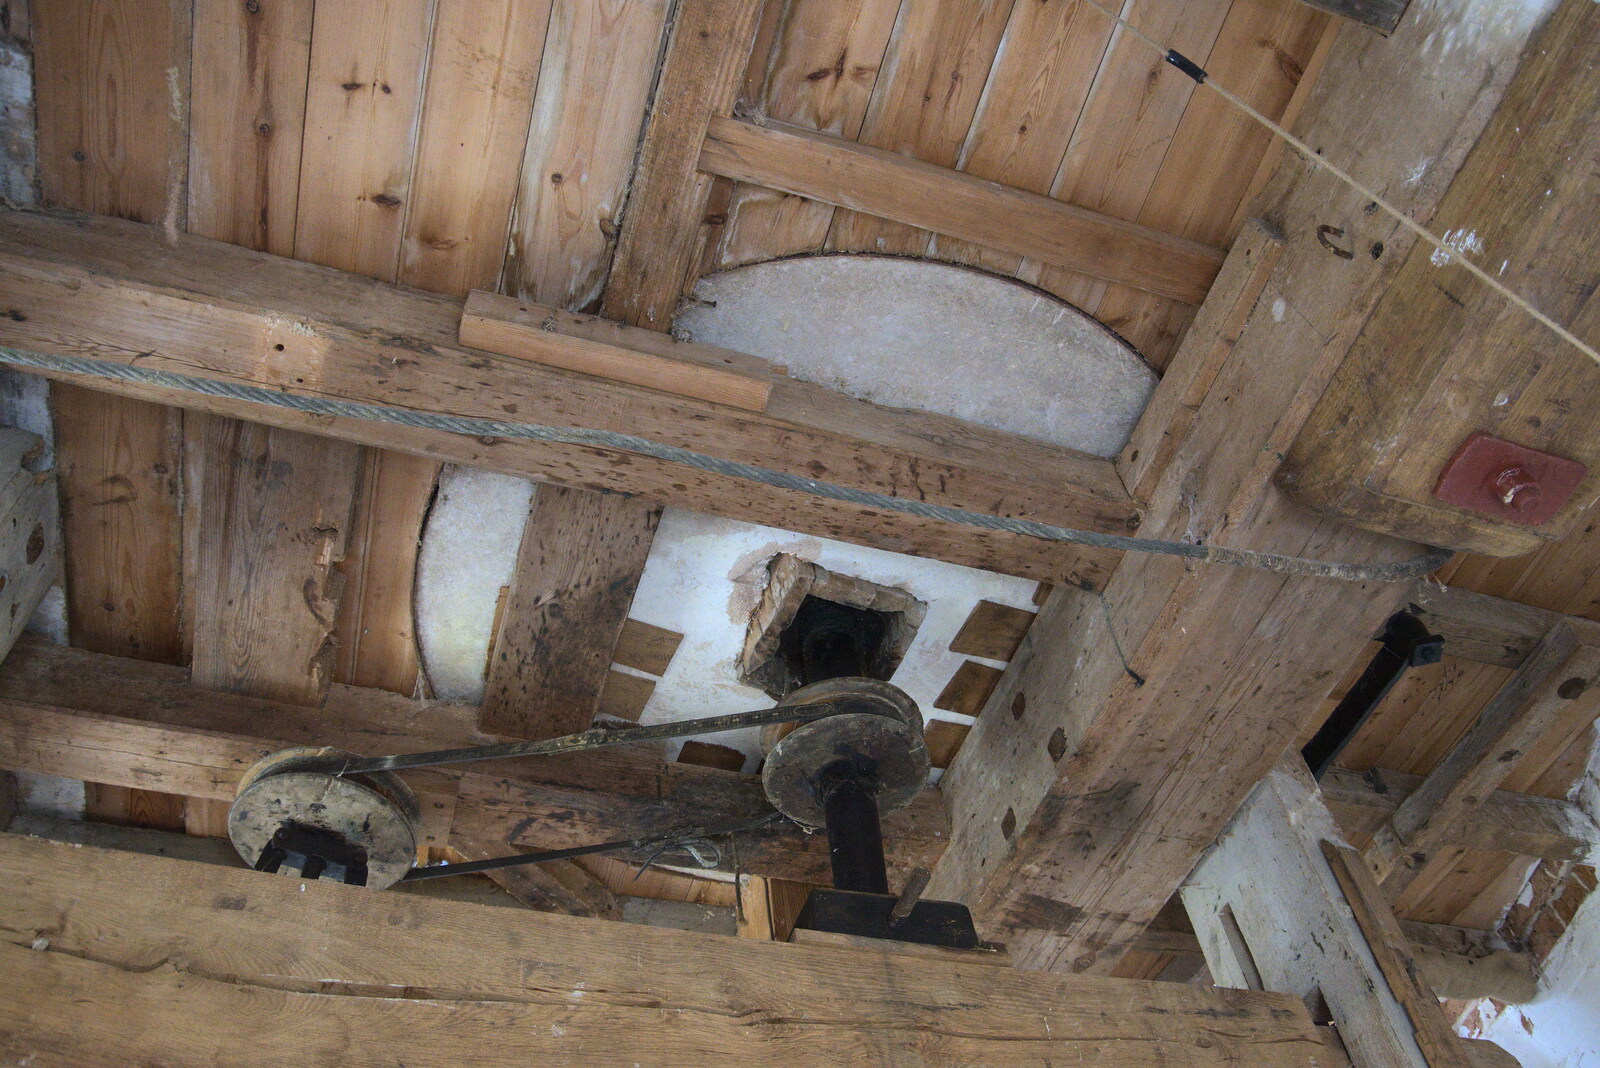 The underside of a millstone from An Open Day at the Windmill, Billingford, Norfolk - 21st August 2021